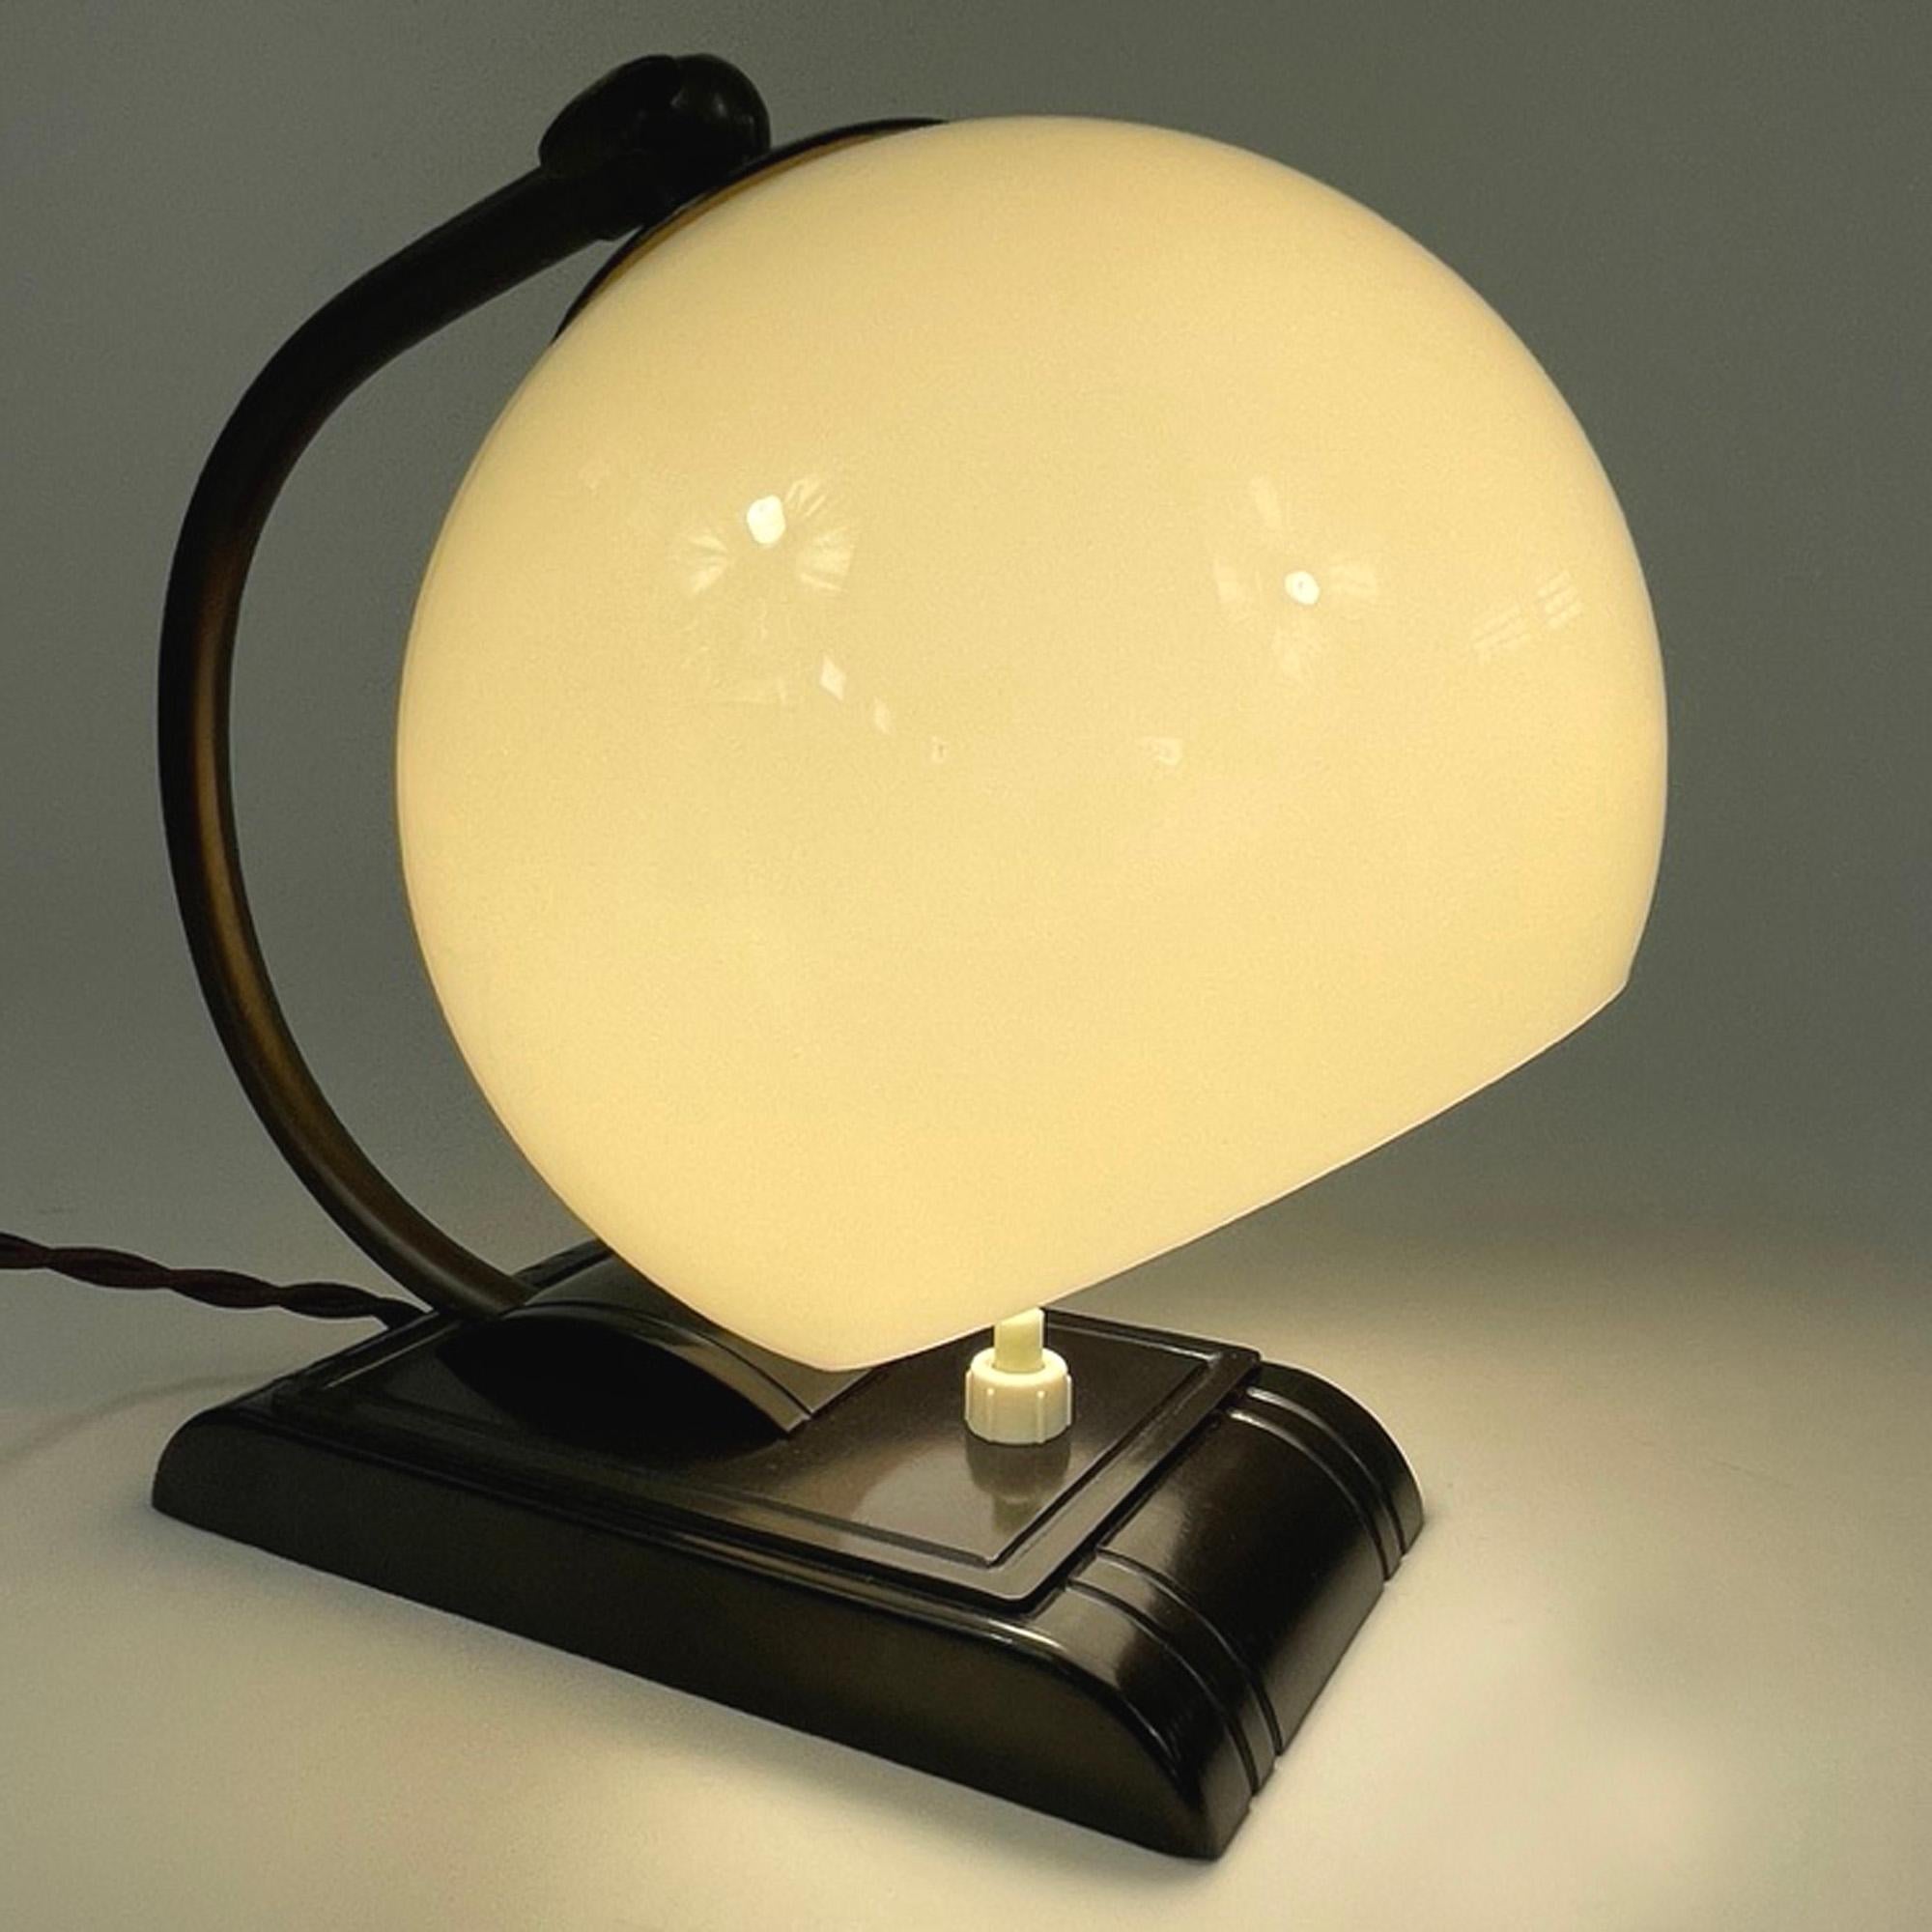 Art Deco Streamline Design Bakelite and Opaline Table Lamp, 1920s to 1930s For Sale 1